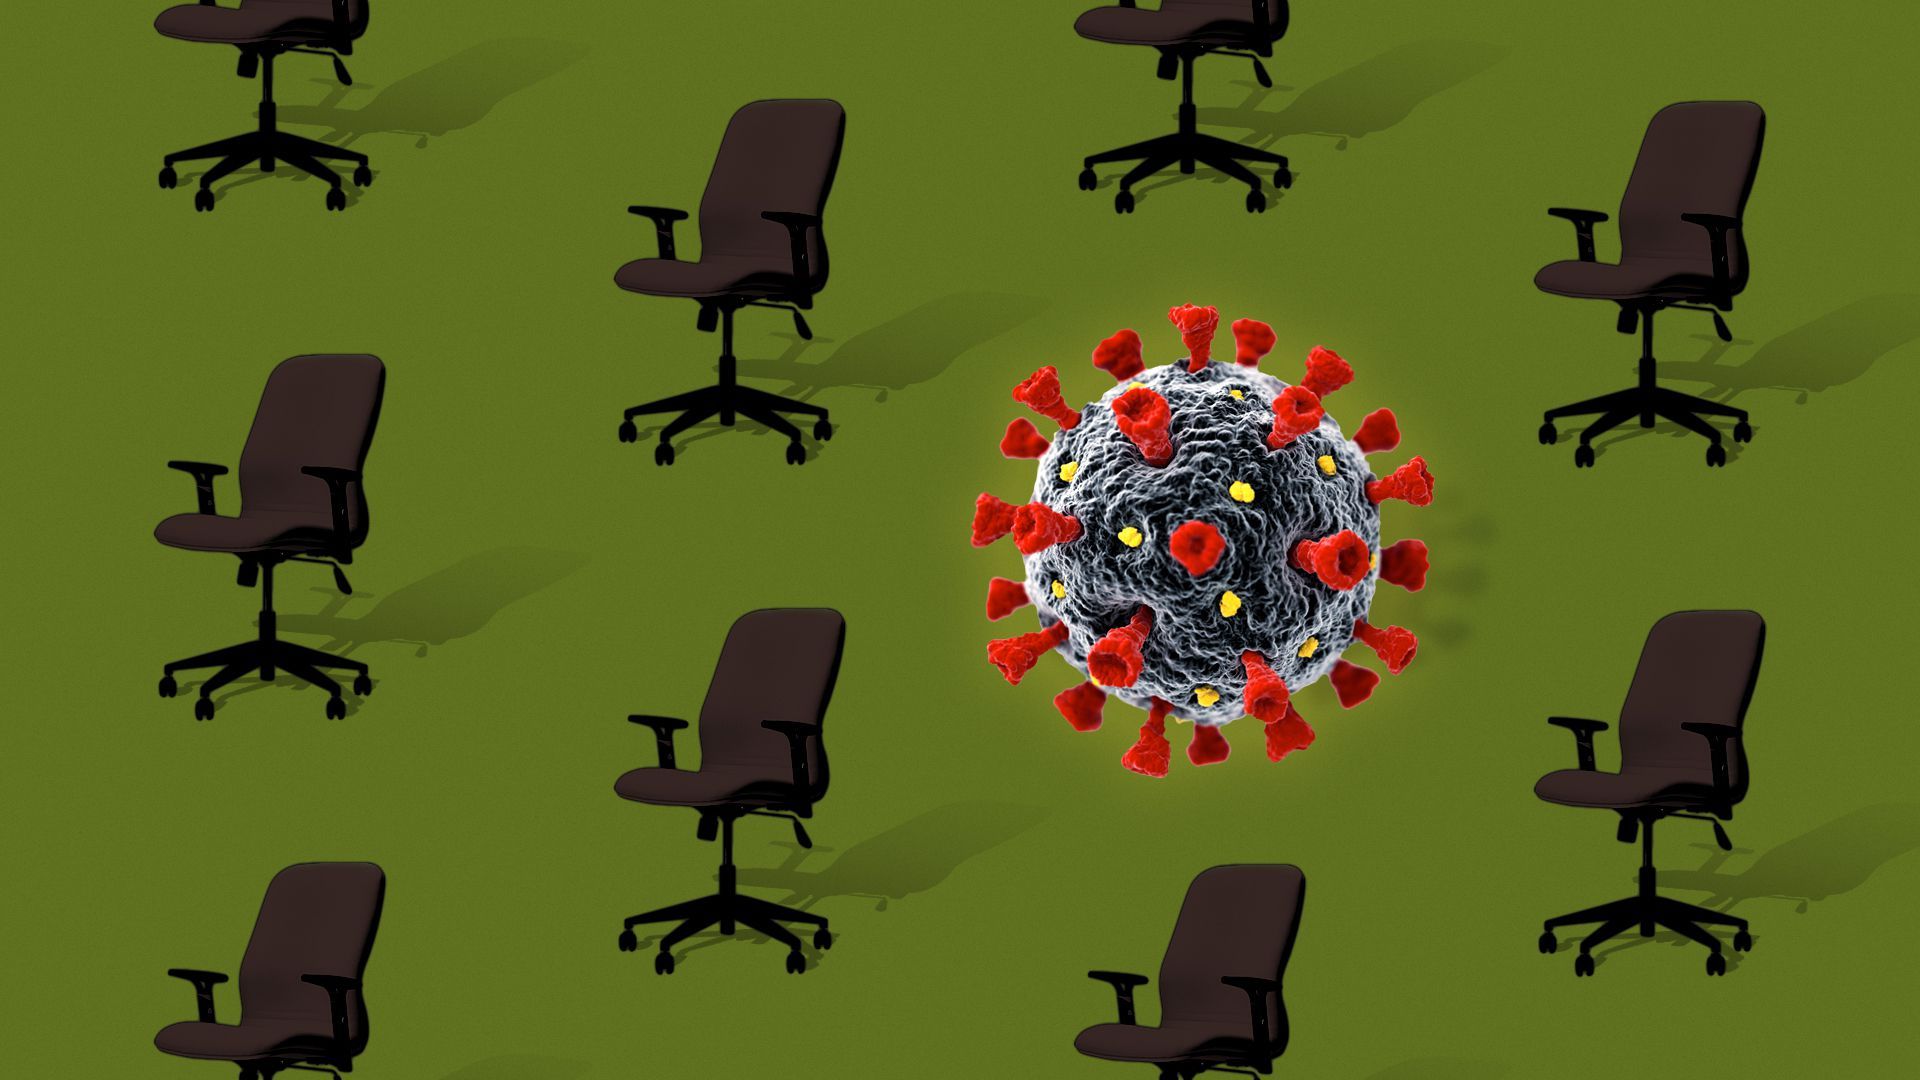 Pattern of office chairs with a single image of the coronavirus virus breaking up the pattern.